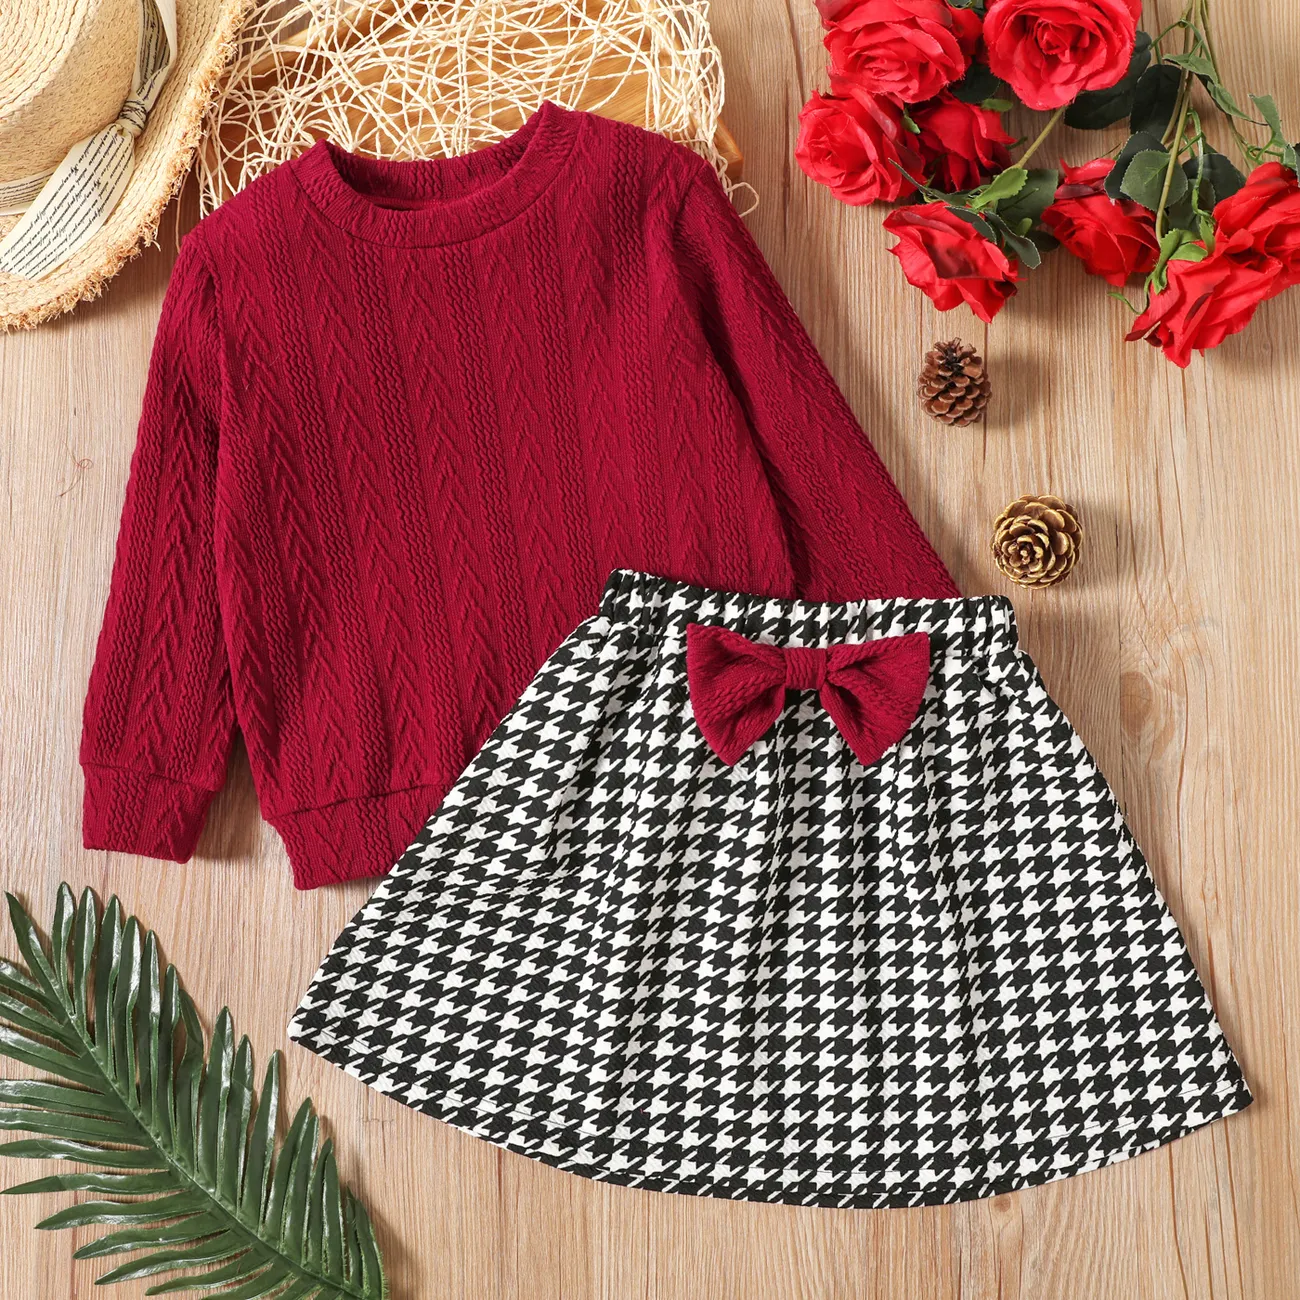 2-piece Toddler Girl Cable Knit Textured Sweater and Bowknot Design Houndstooth Skirt Set Burgundy big image 1